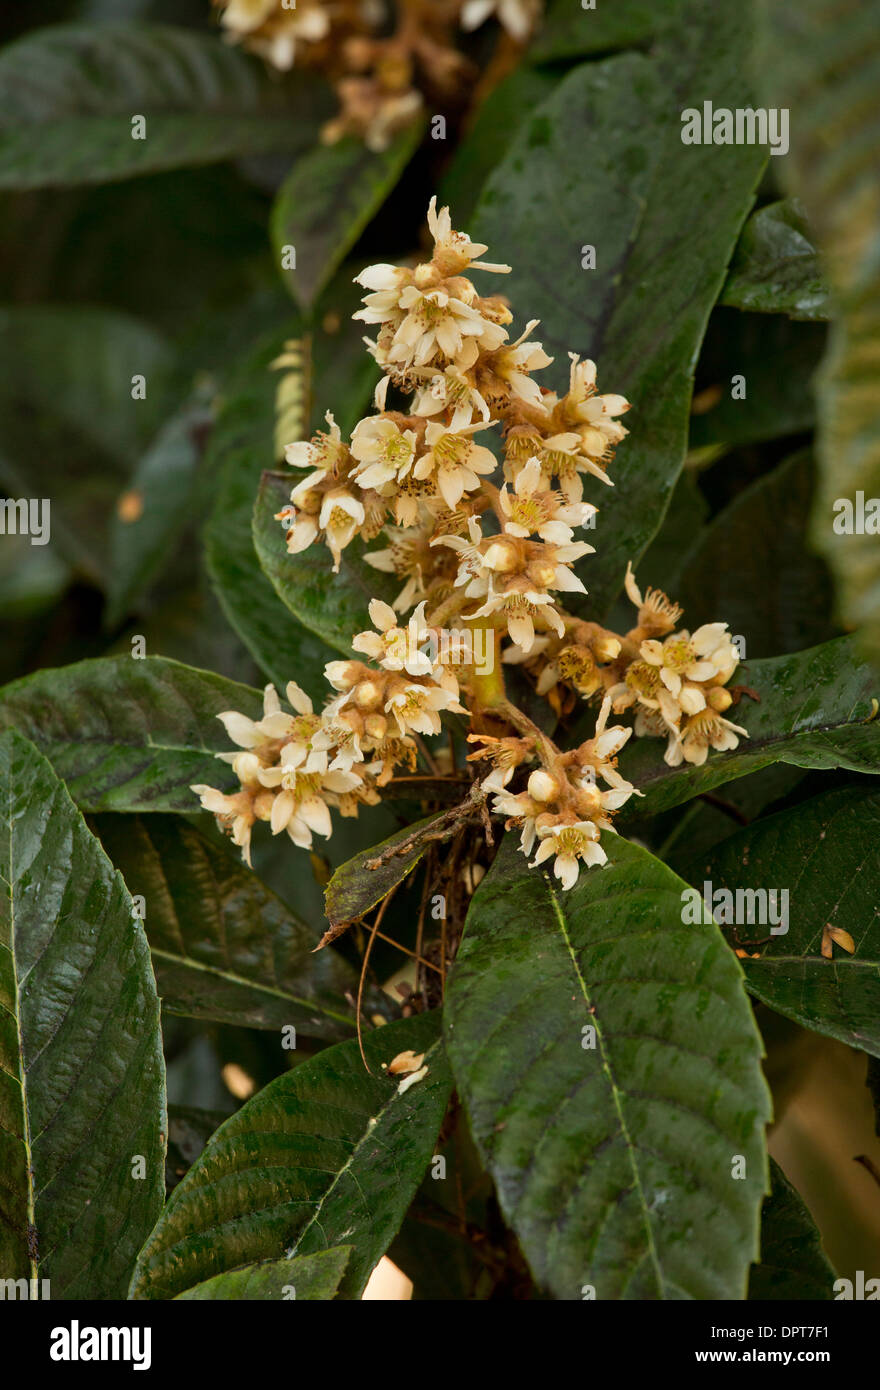 Loquat, Eriobotrya japonica in flower in autumn; produces edible fruit. France Stock Photo